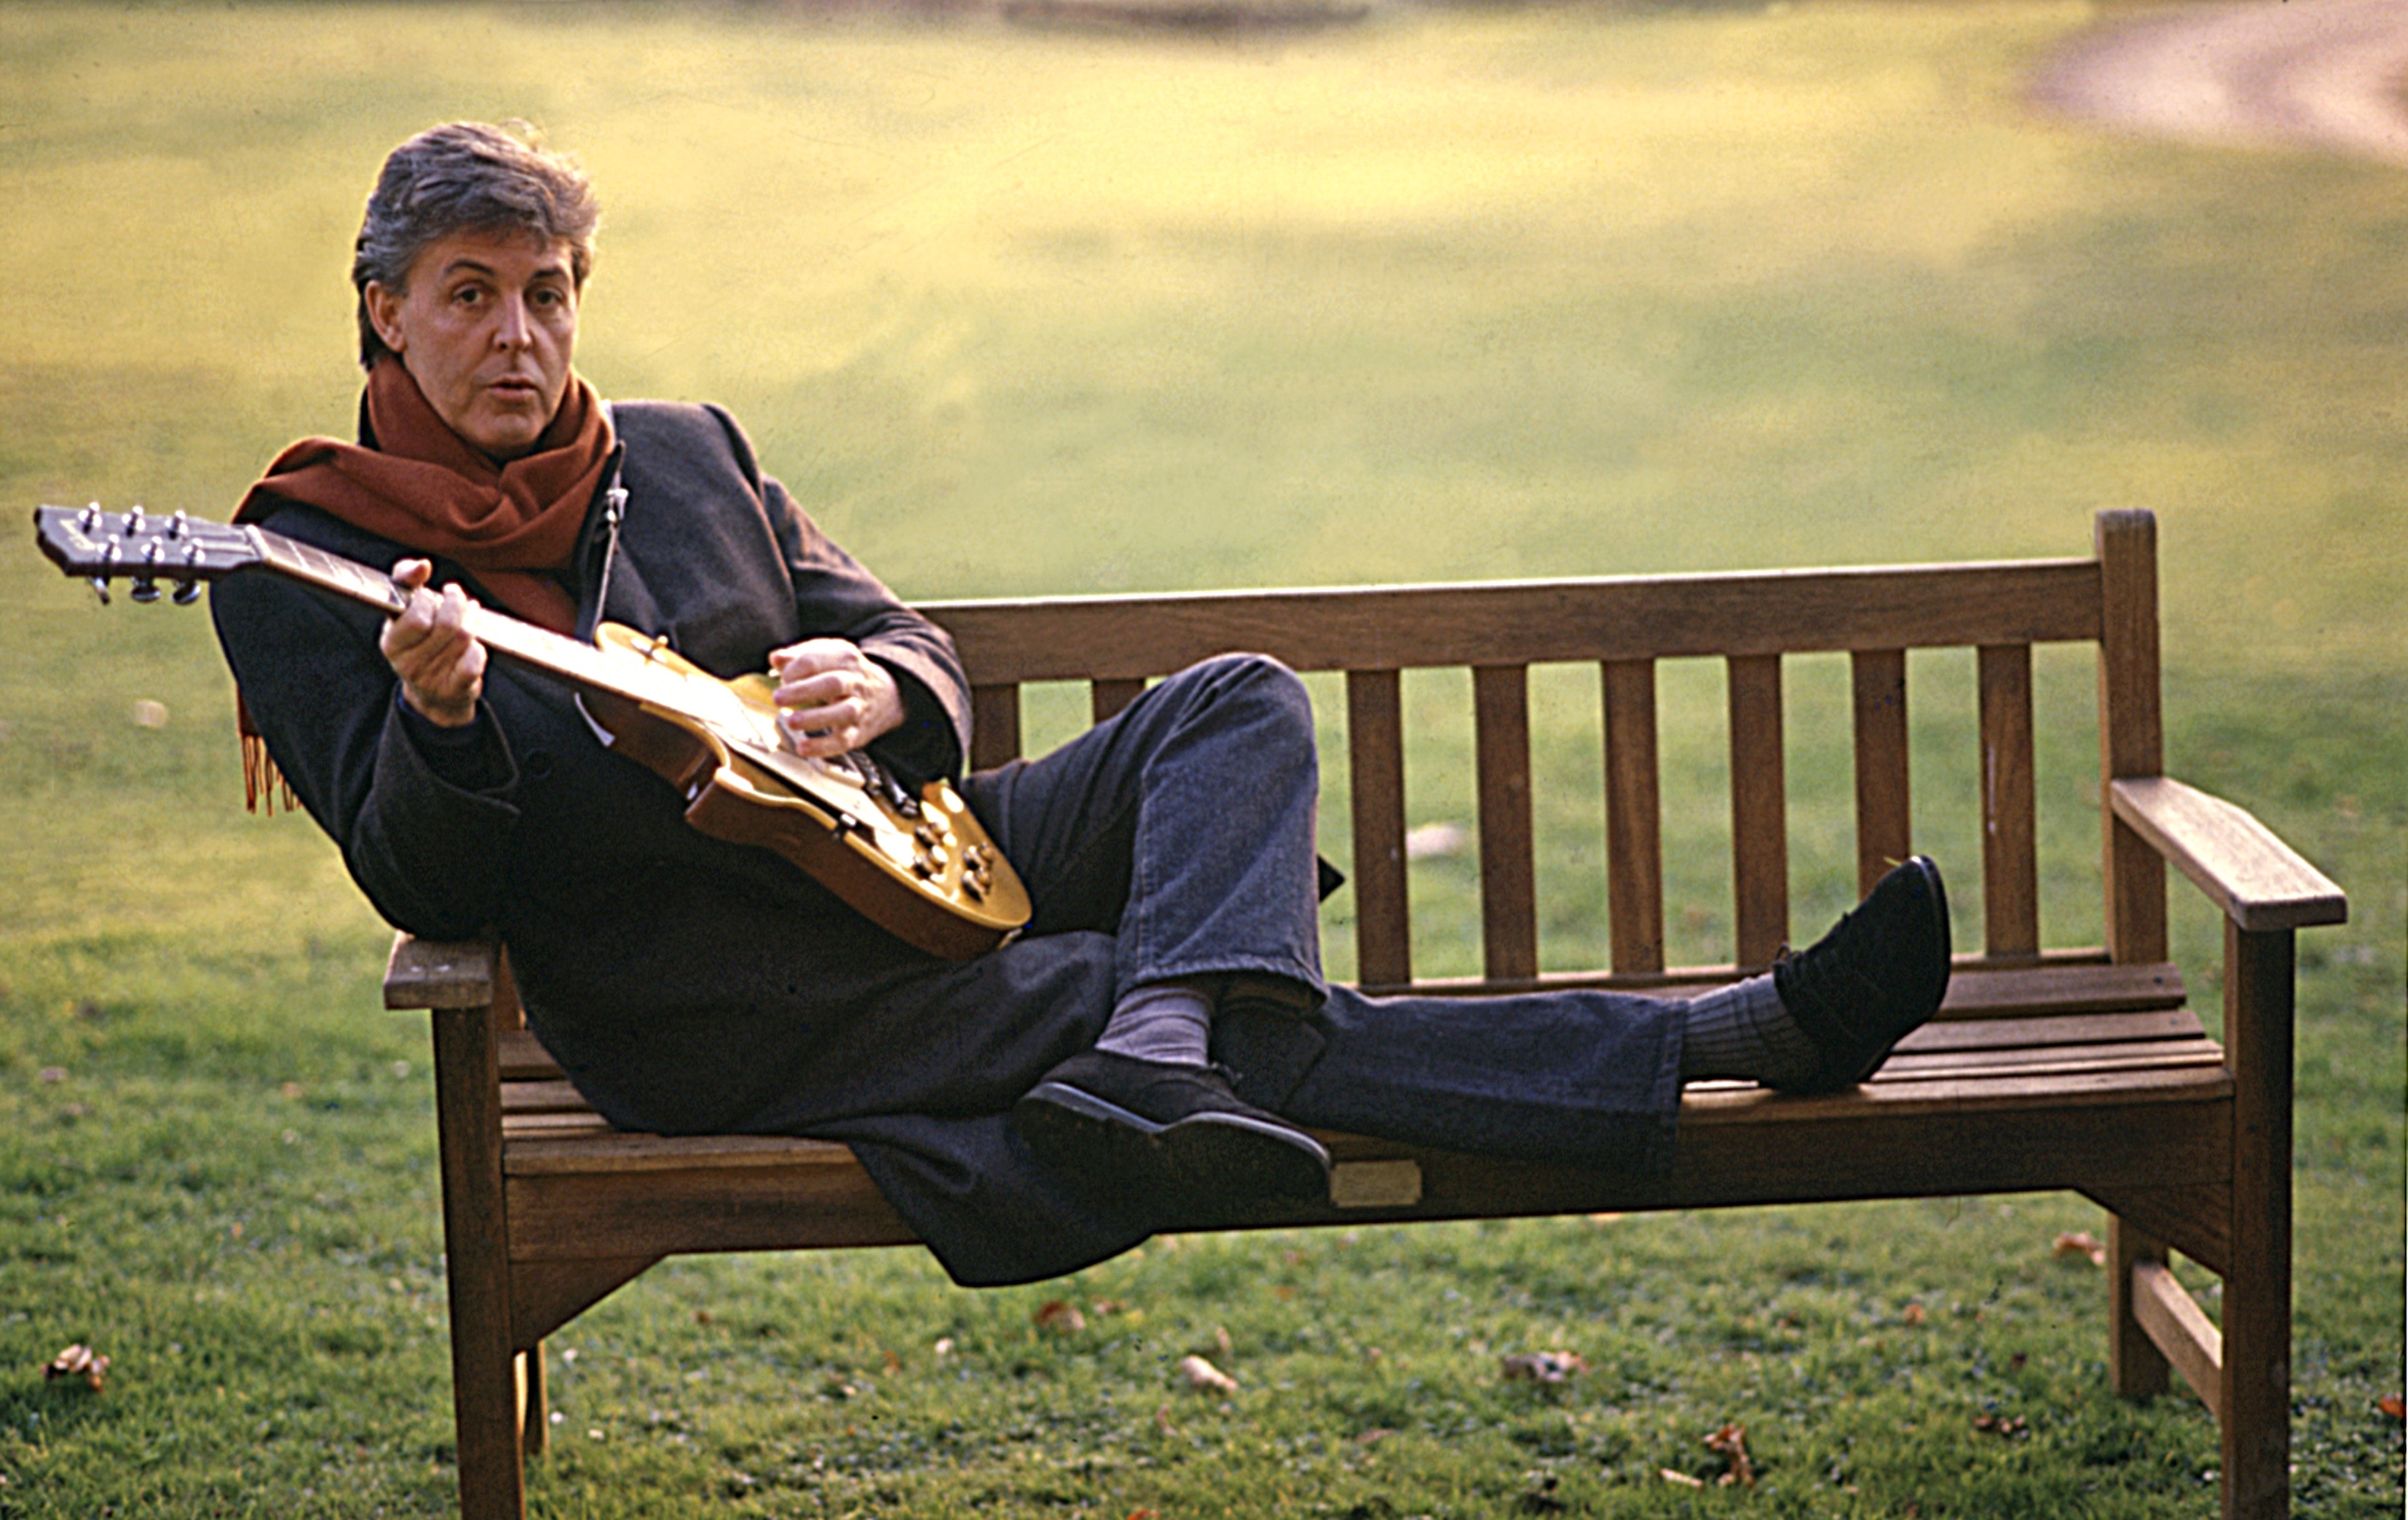 Paul McCartney poses on a bench while playing guitar in 1987